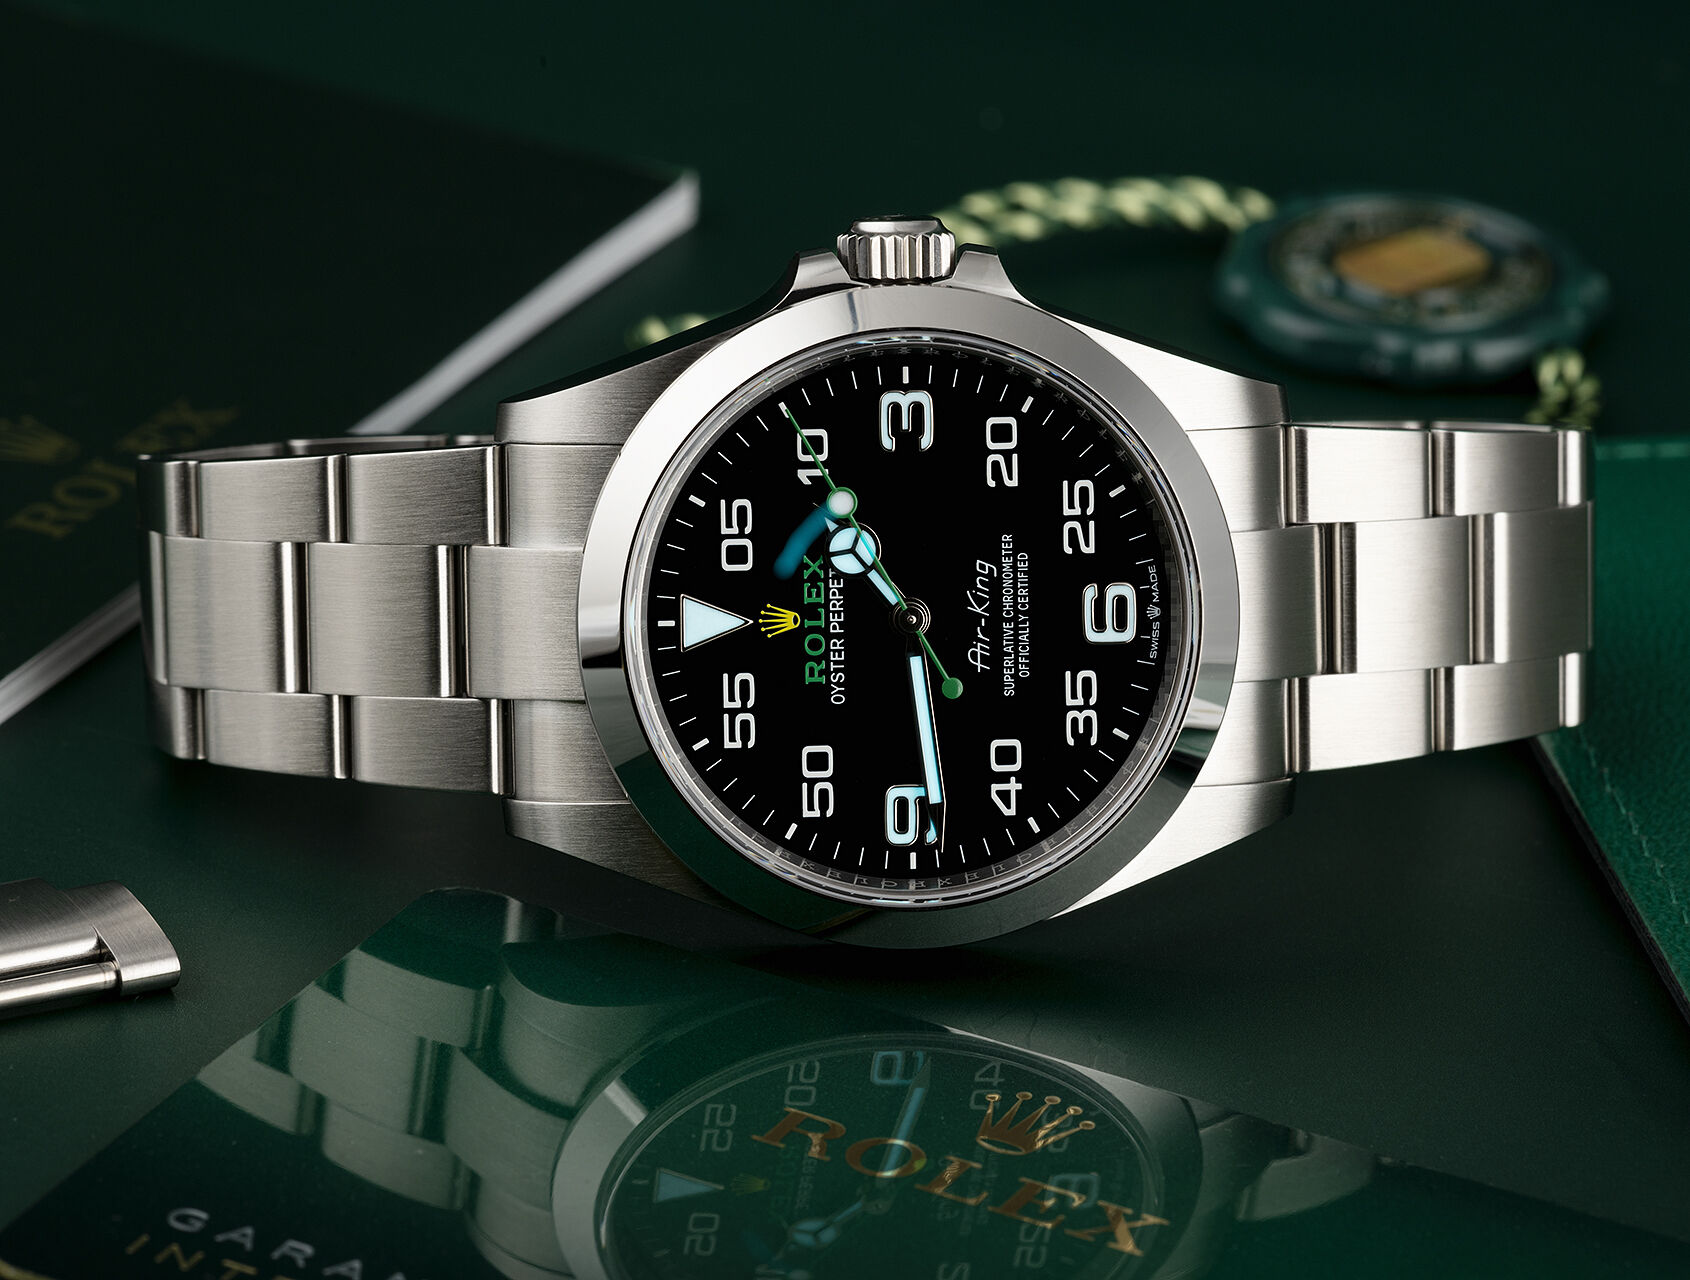 ref 126900 | 126900 - Crown Guards | Rolex Air-King